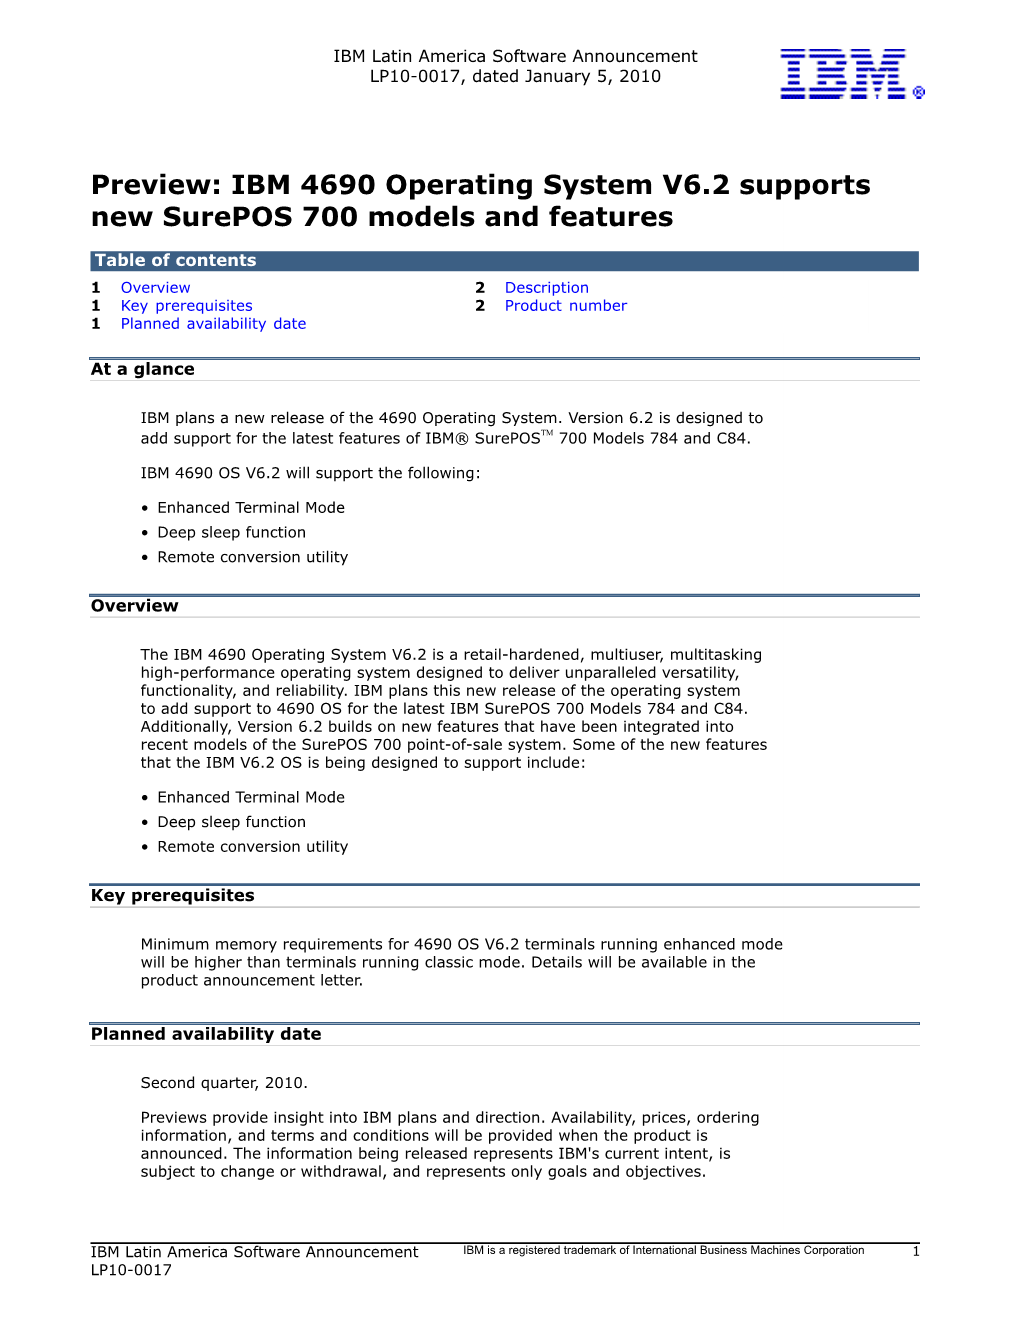 IBM 4690 Operating System V6.2 Supports New Surepos 700 Models and Features